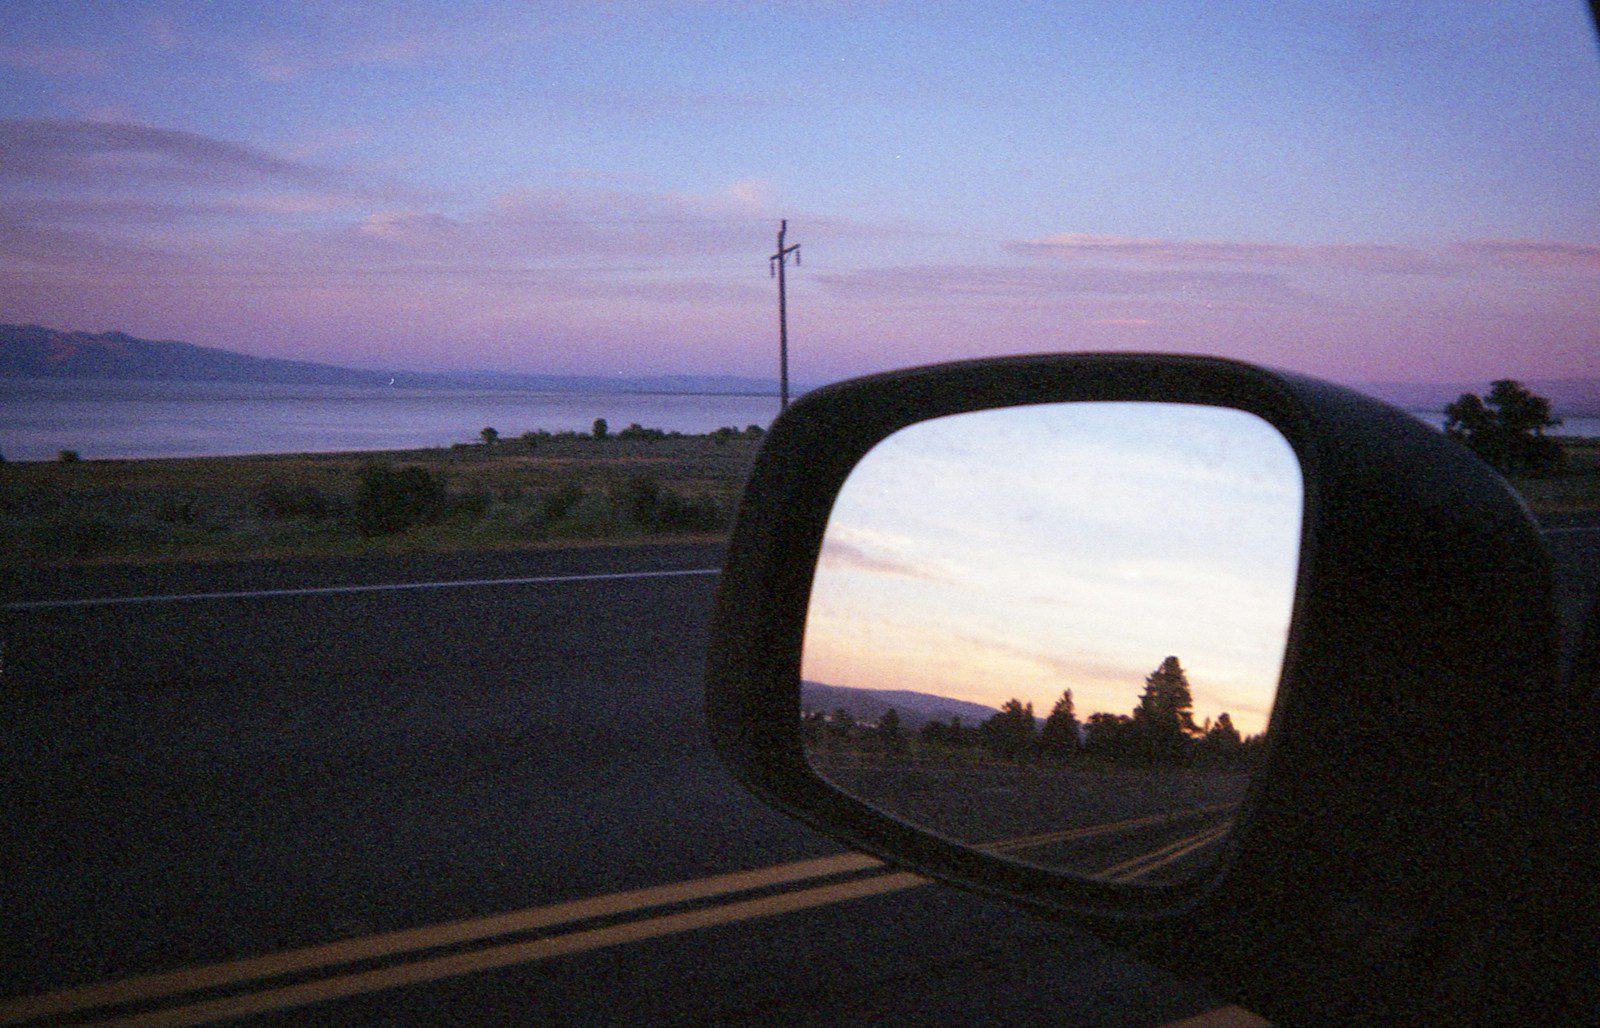 a rear view mirror of a car on a road